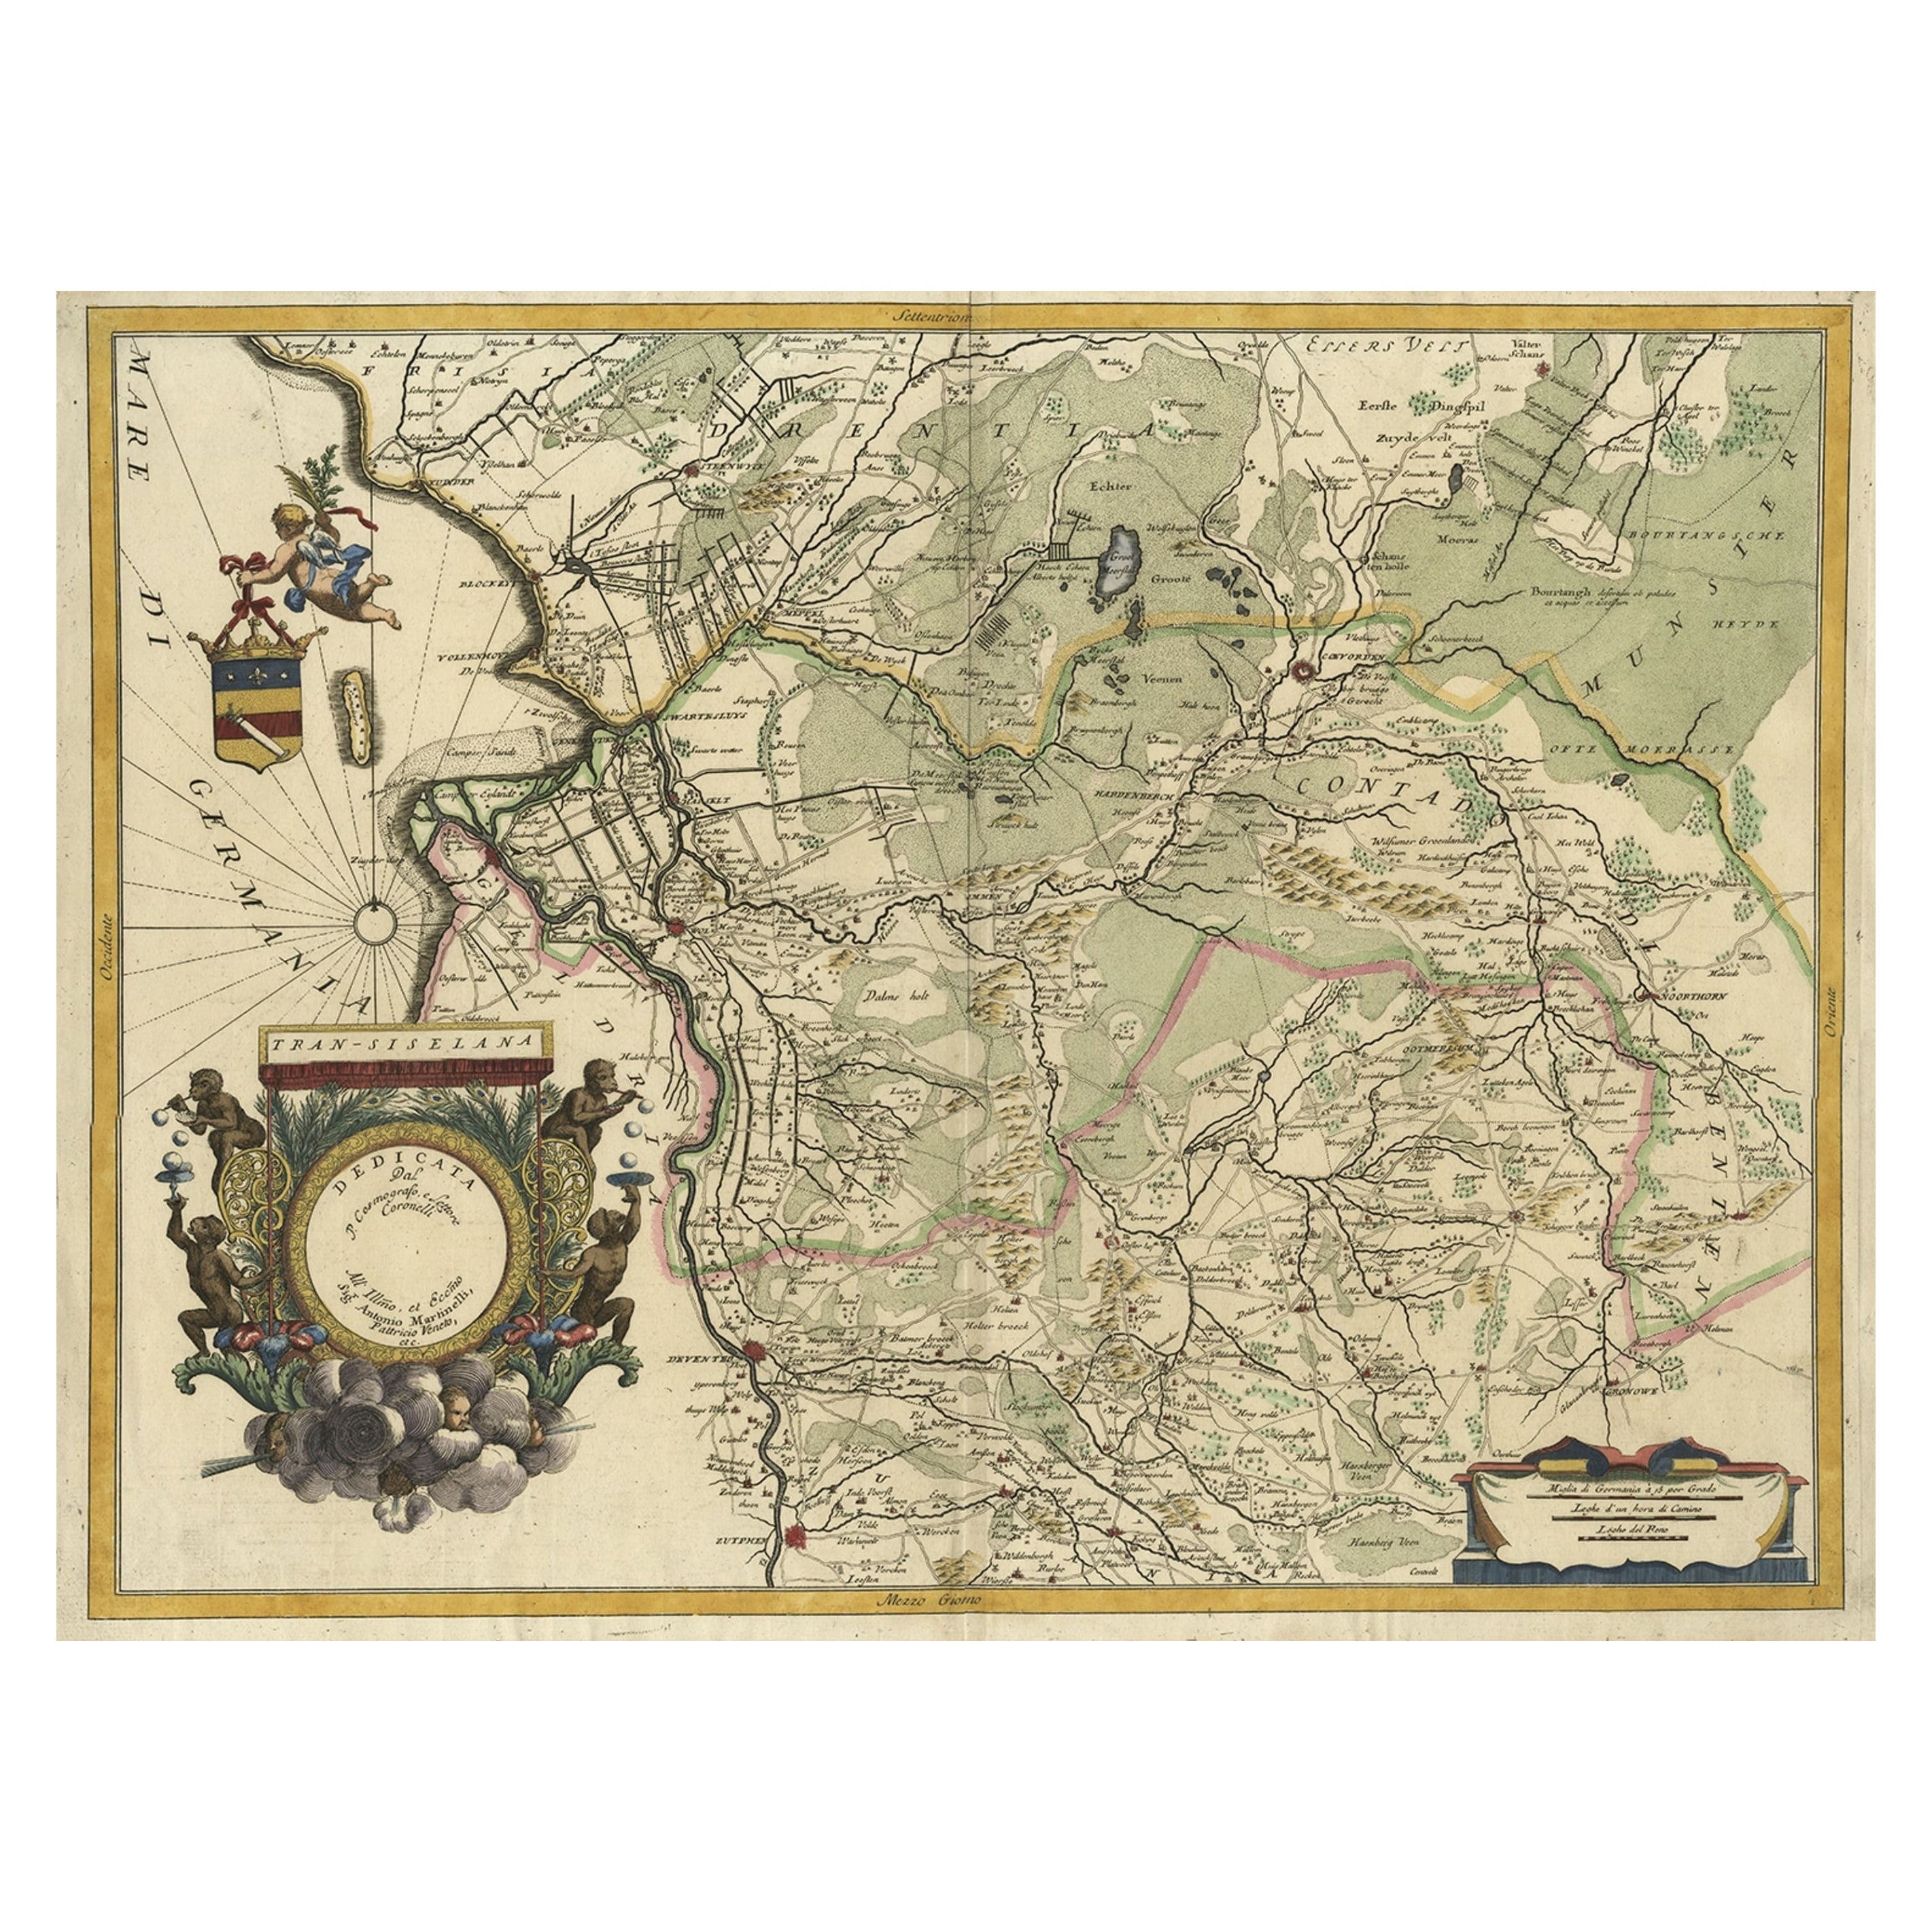 Splendid Detailed Map of the Province of Overijssel in the Netherlands, ca.1692